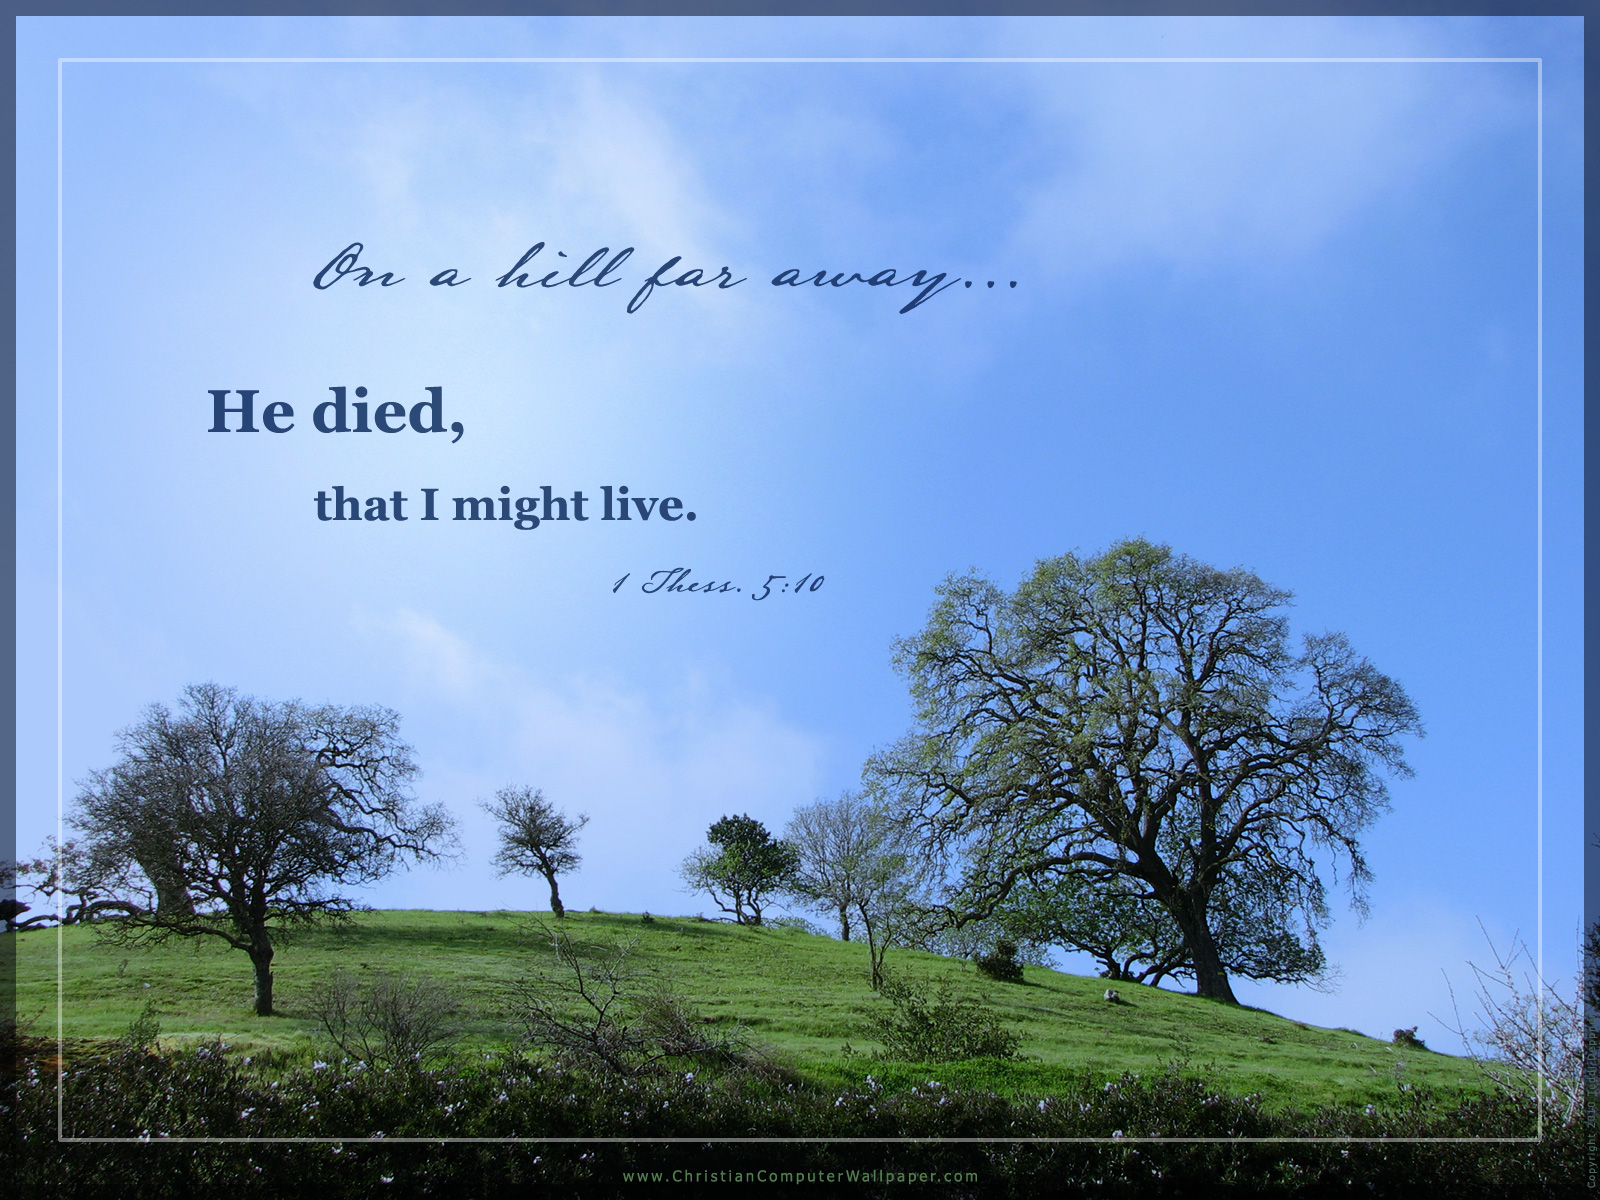 HD Graphics Religious Wallpaper For Easter Sunday